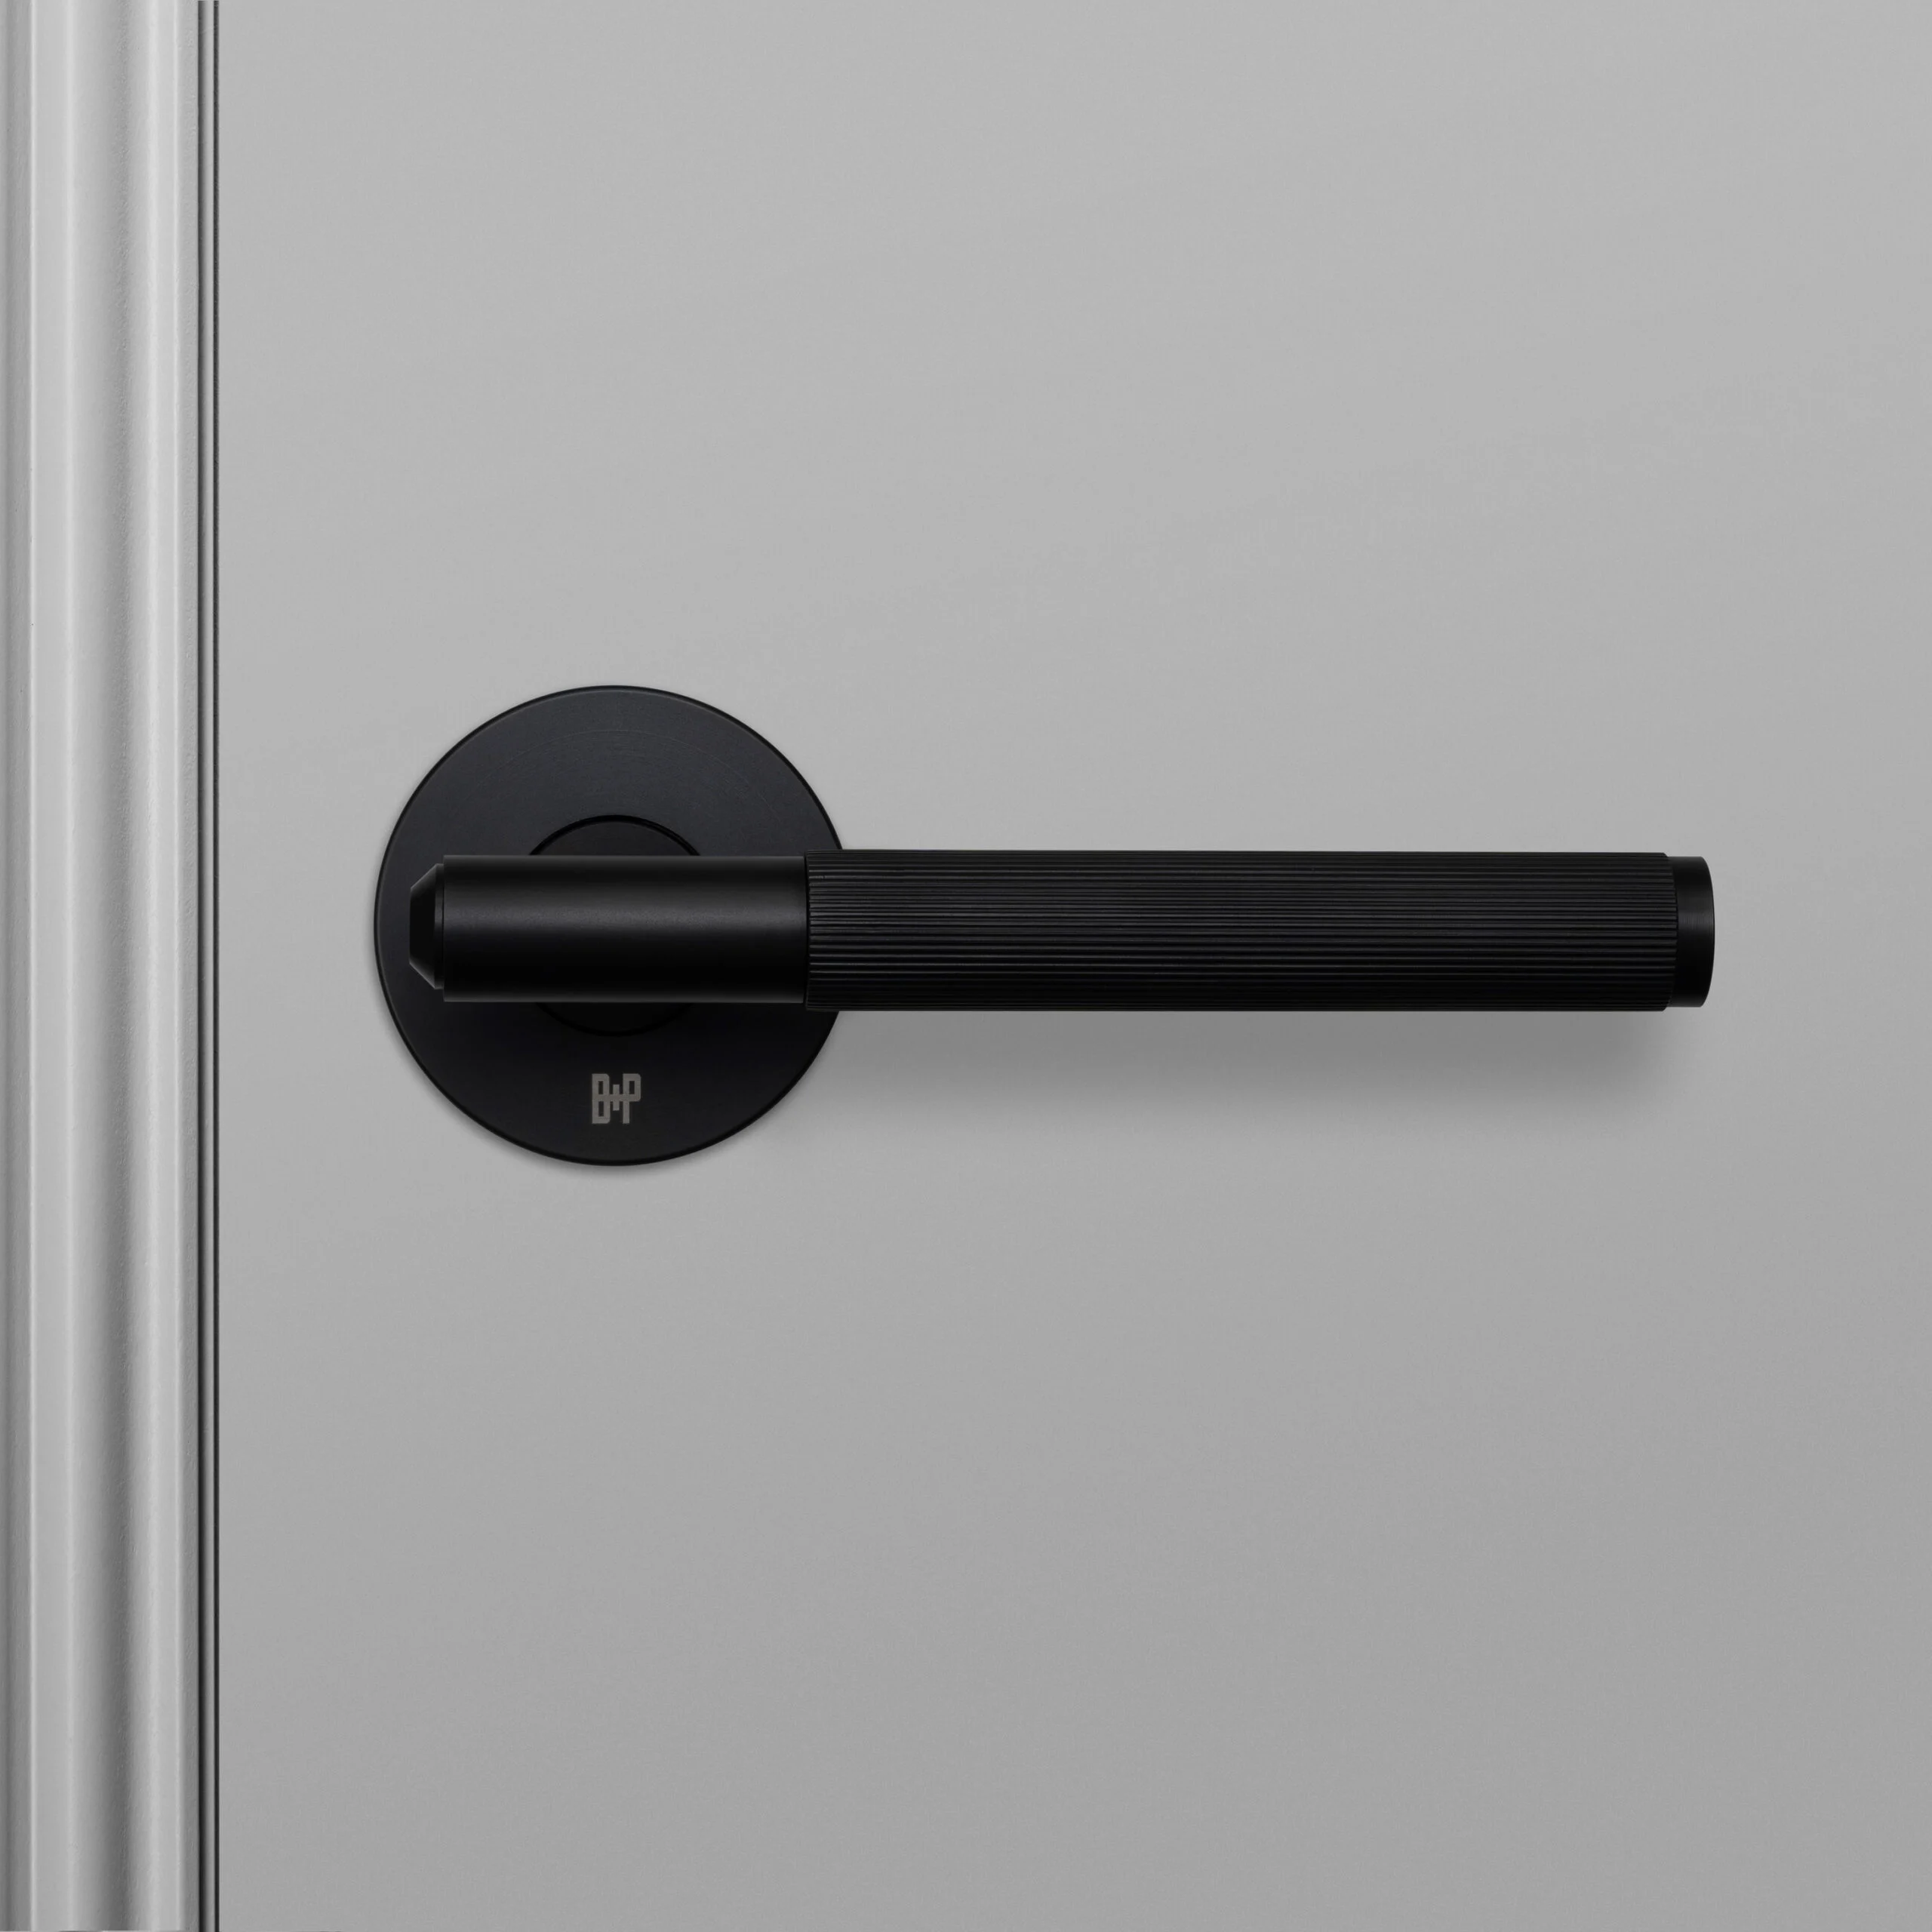 Door-handle_Fixed_Linear_Welders-Black_A2_Web_Square-scaled